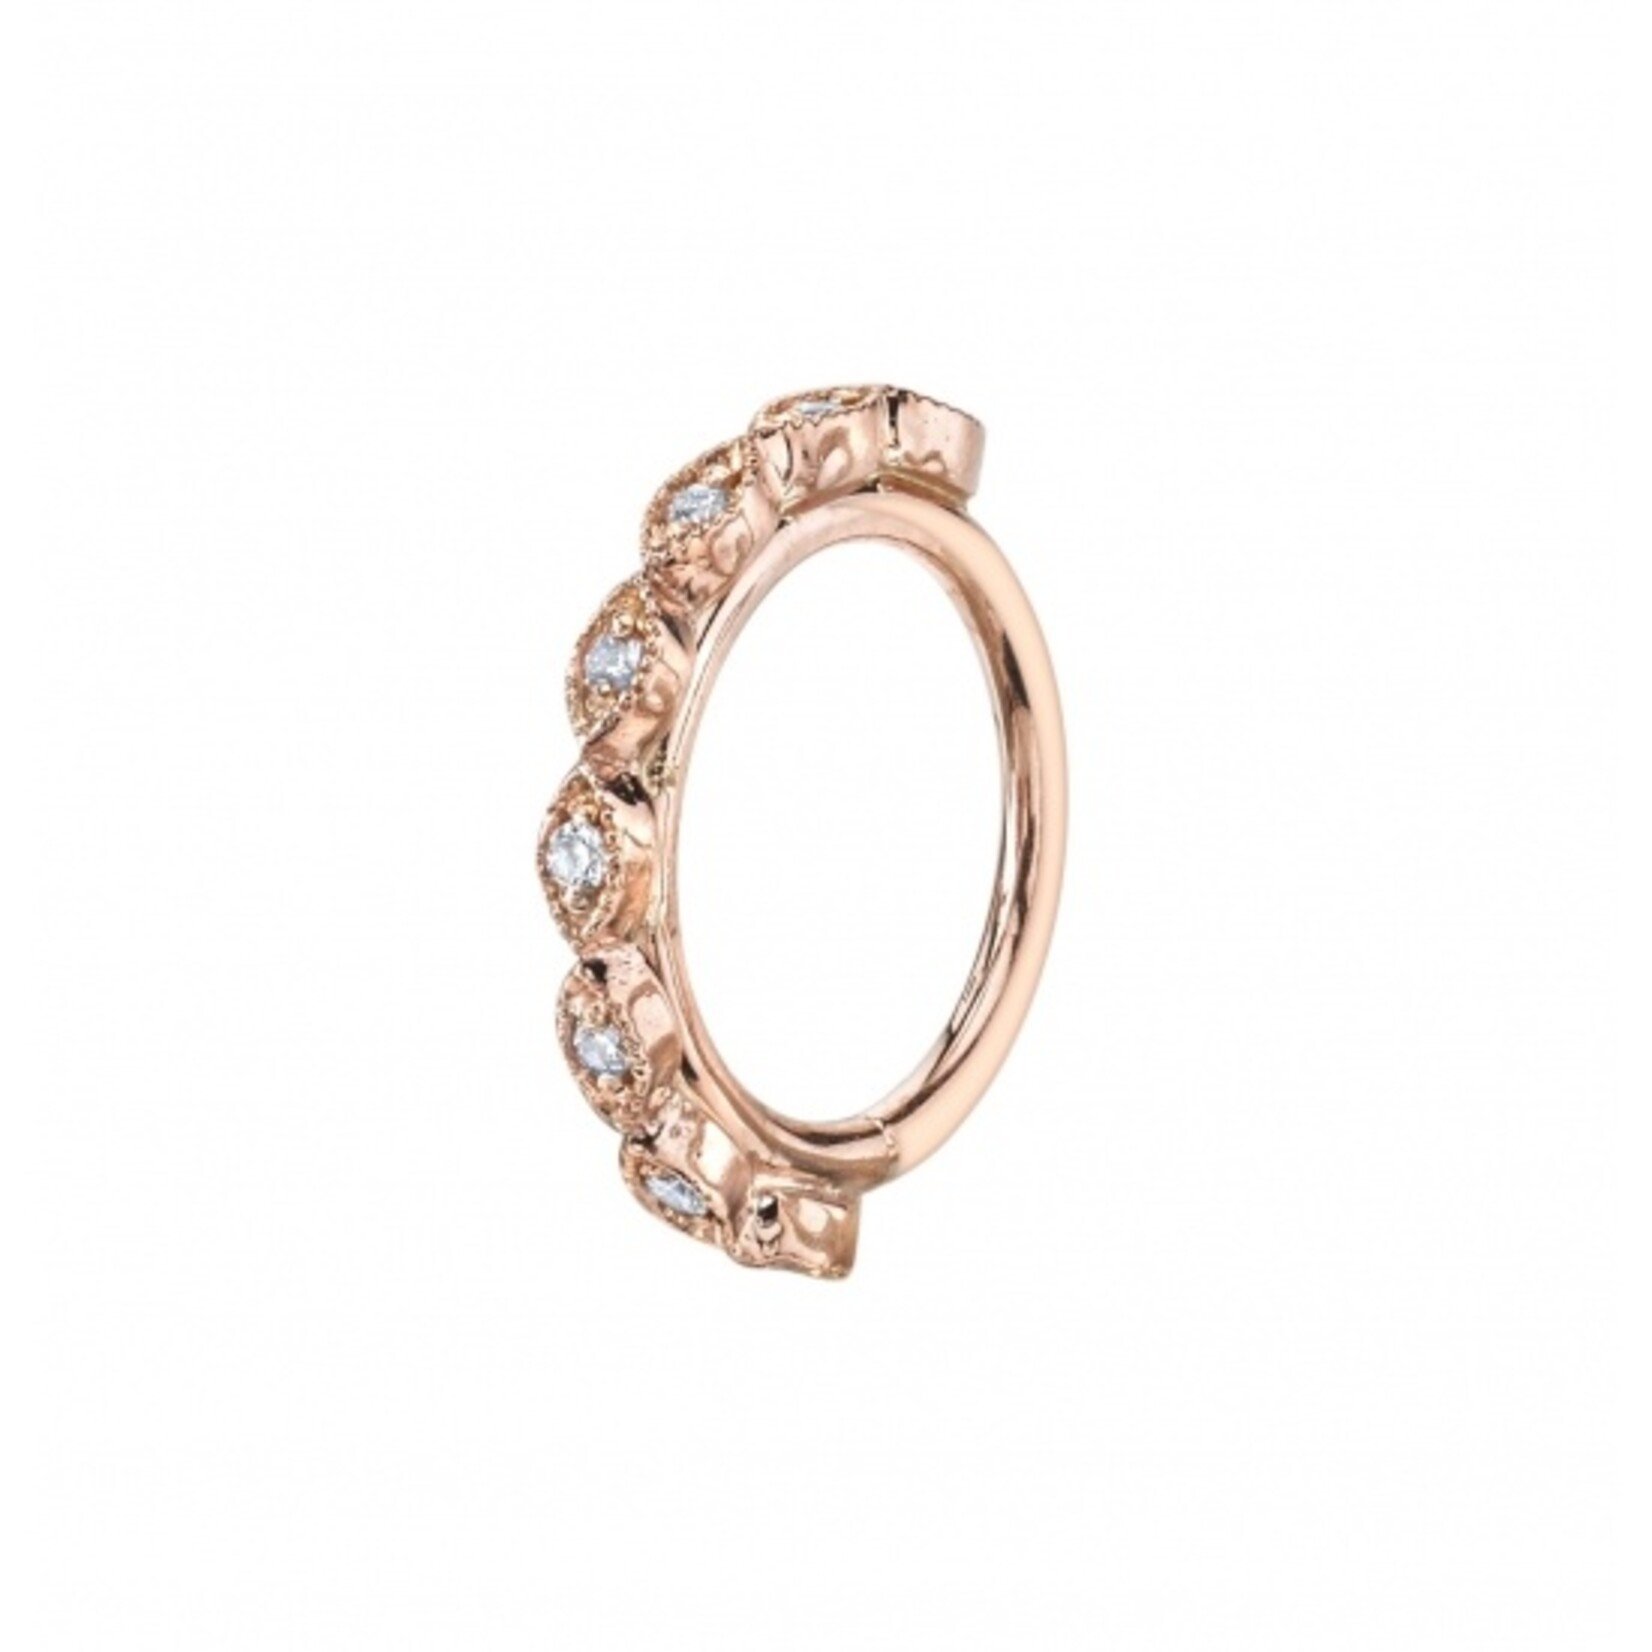 BVLA BVLA 16g 7/16 rose gold "Violet" seam ring with 8x 1.0 CZs